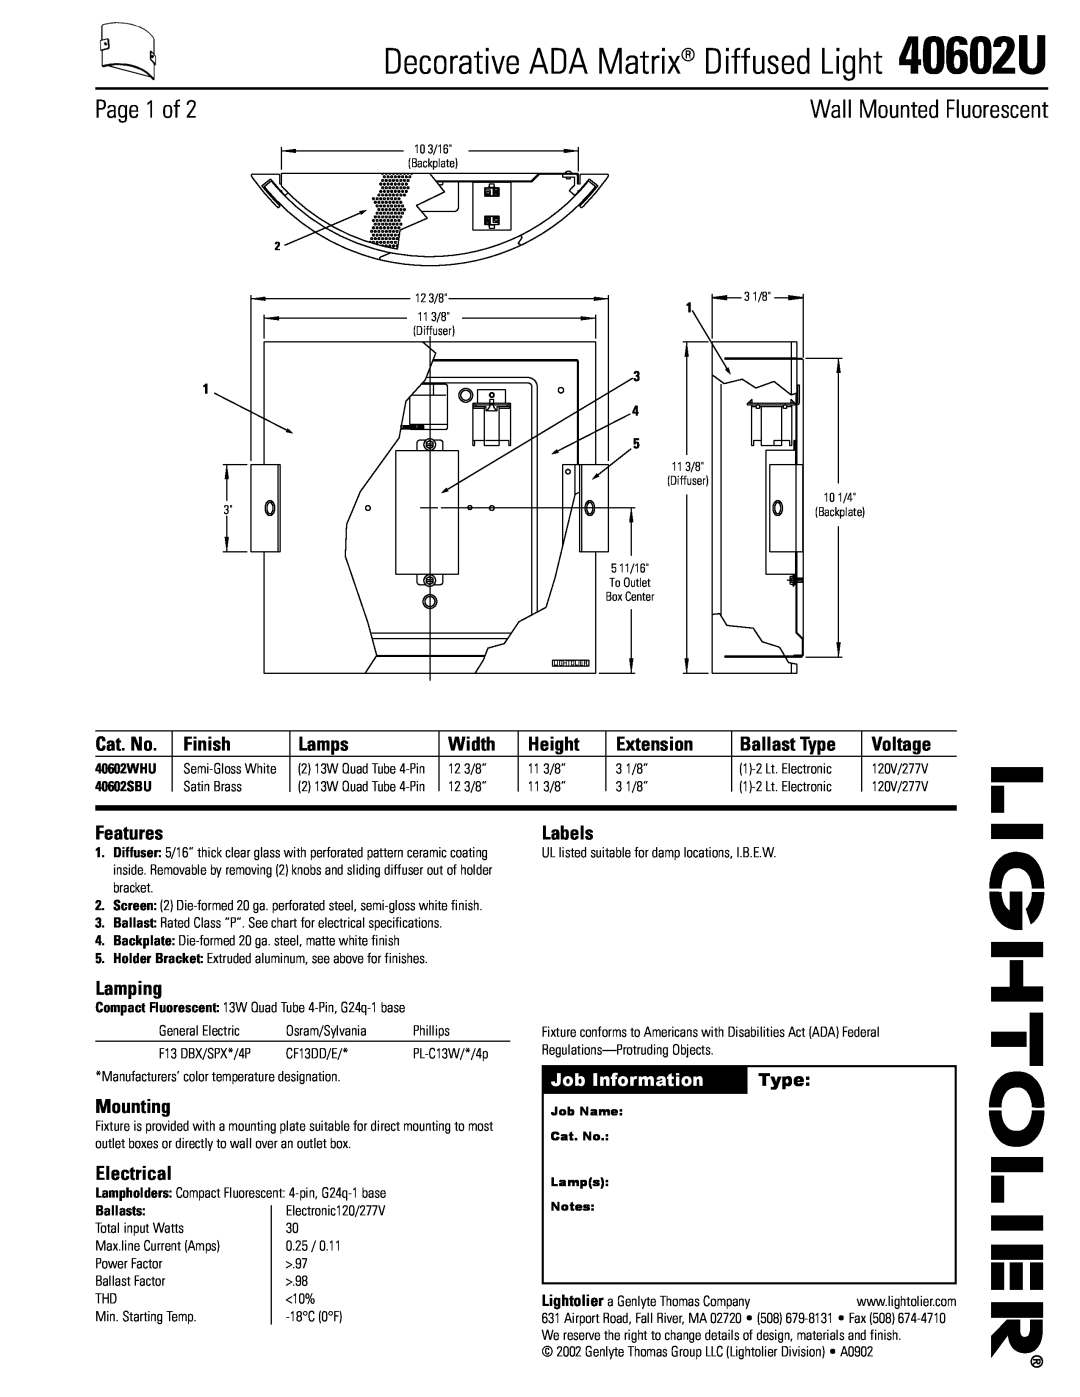 Lightolier specifications Decorative ADA Matrix Diffused Light 40602U, Page 1 of, Wall Mounted Fluorescent, Cat. No 